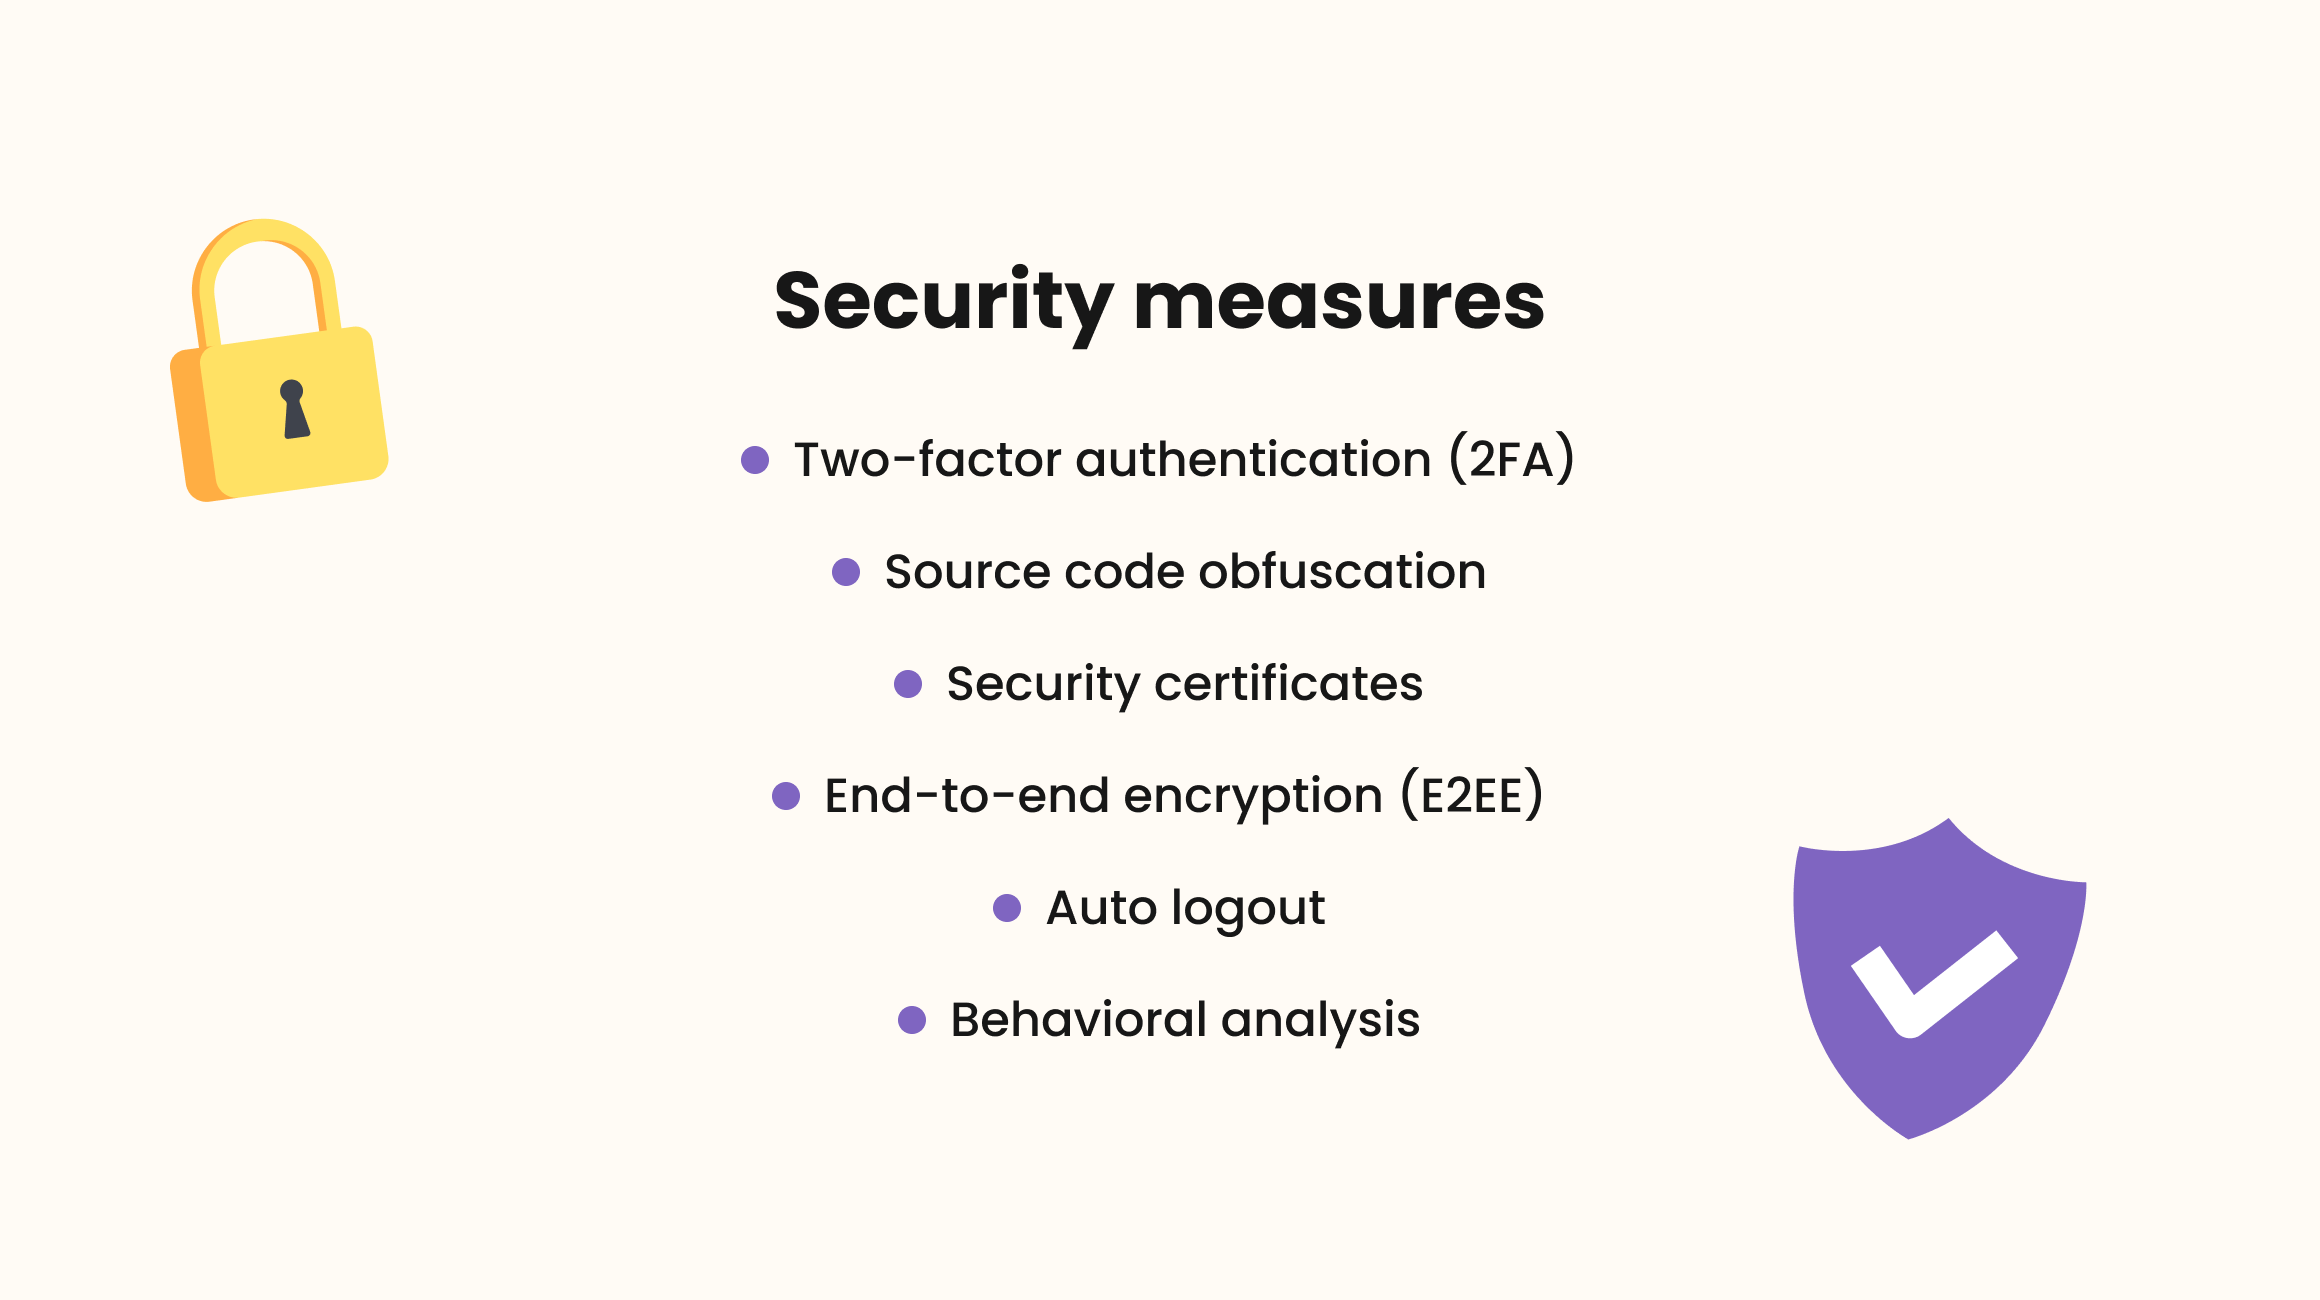 Security measures for banking apps